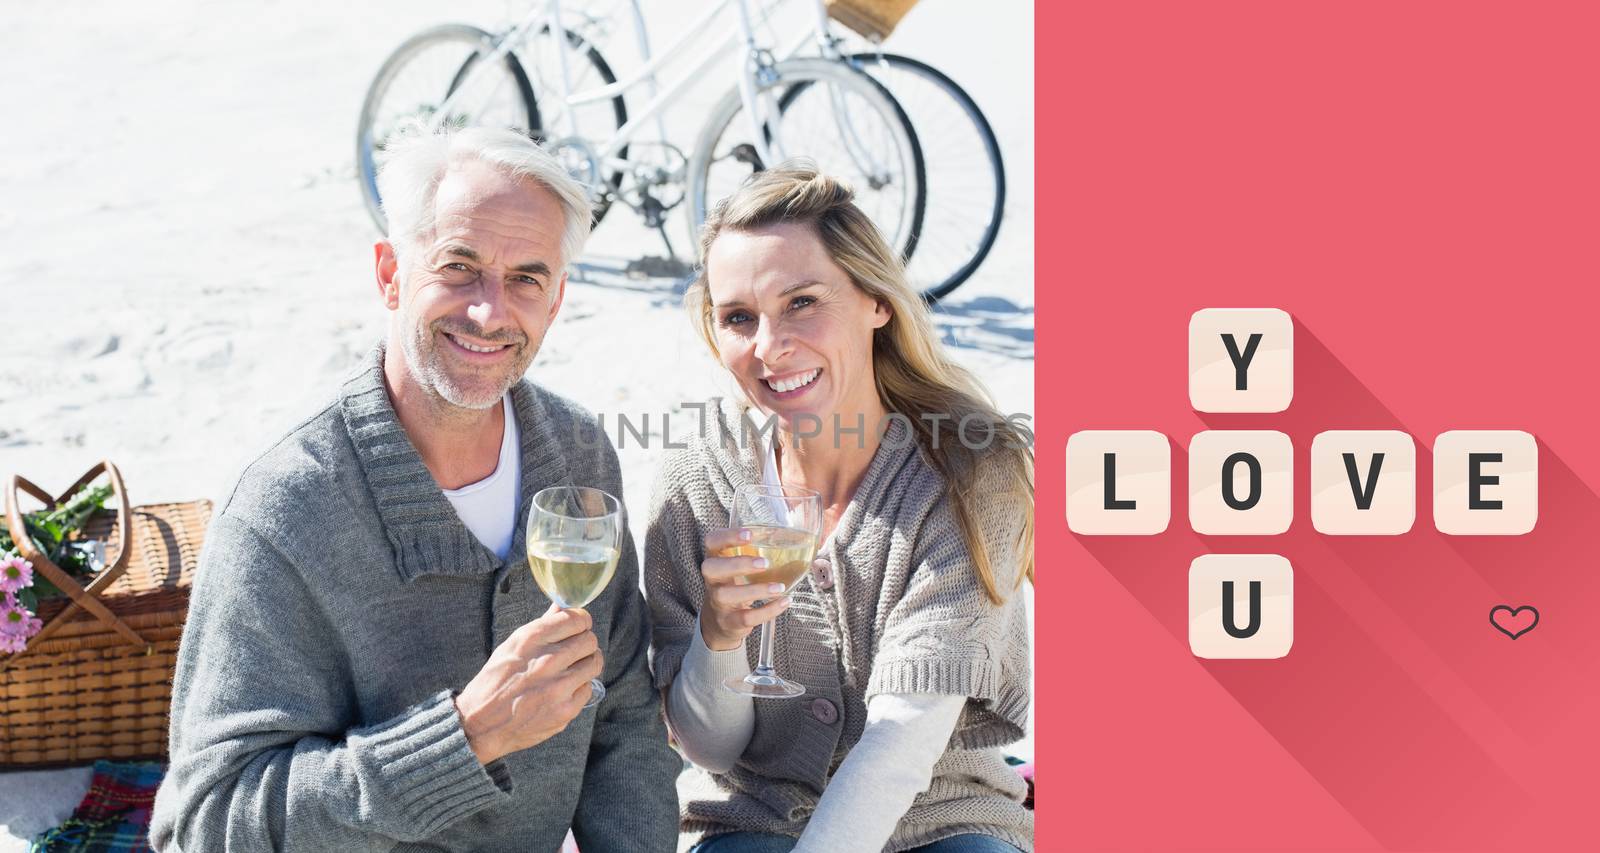 Couple enjoying white wine on picnic at the beach smiling at camera against love you tiles